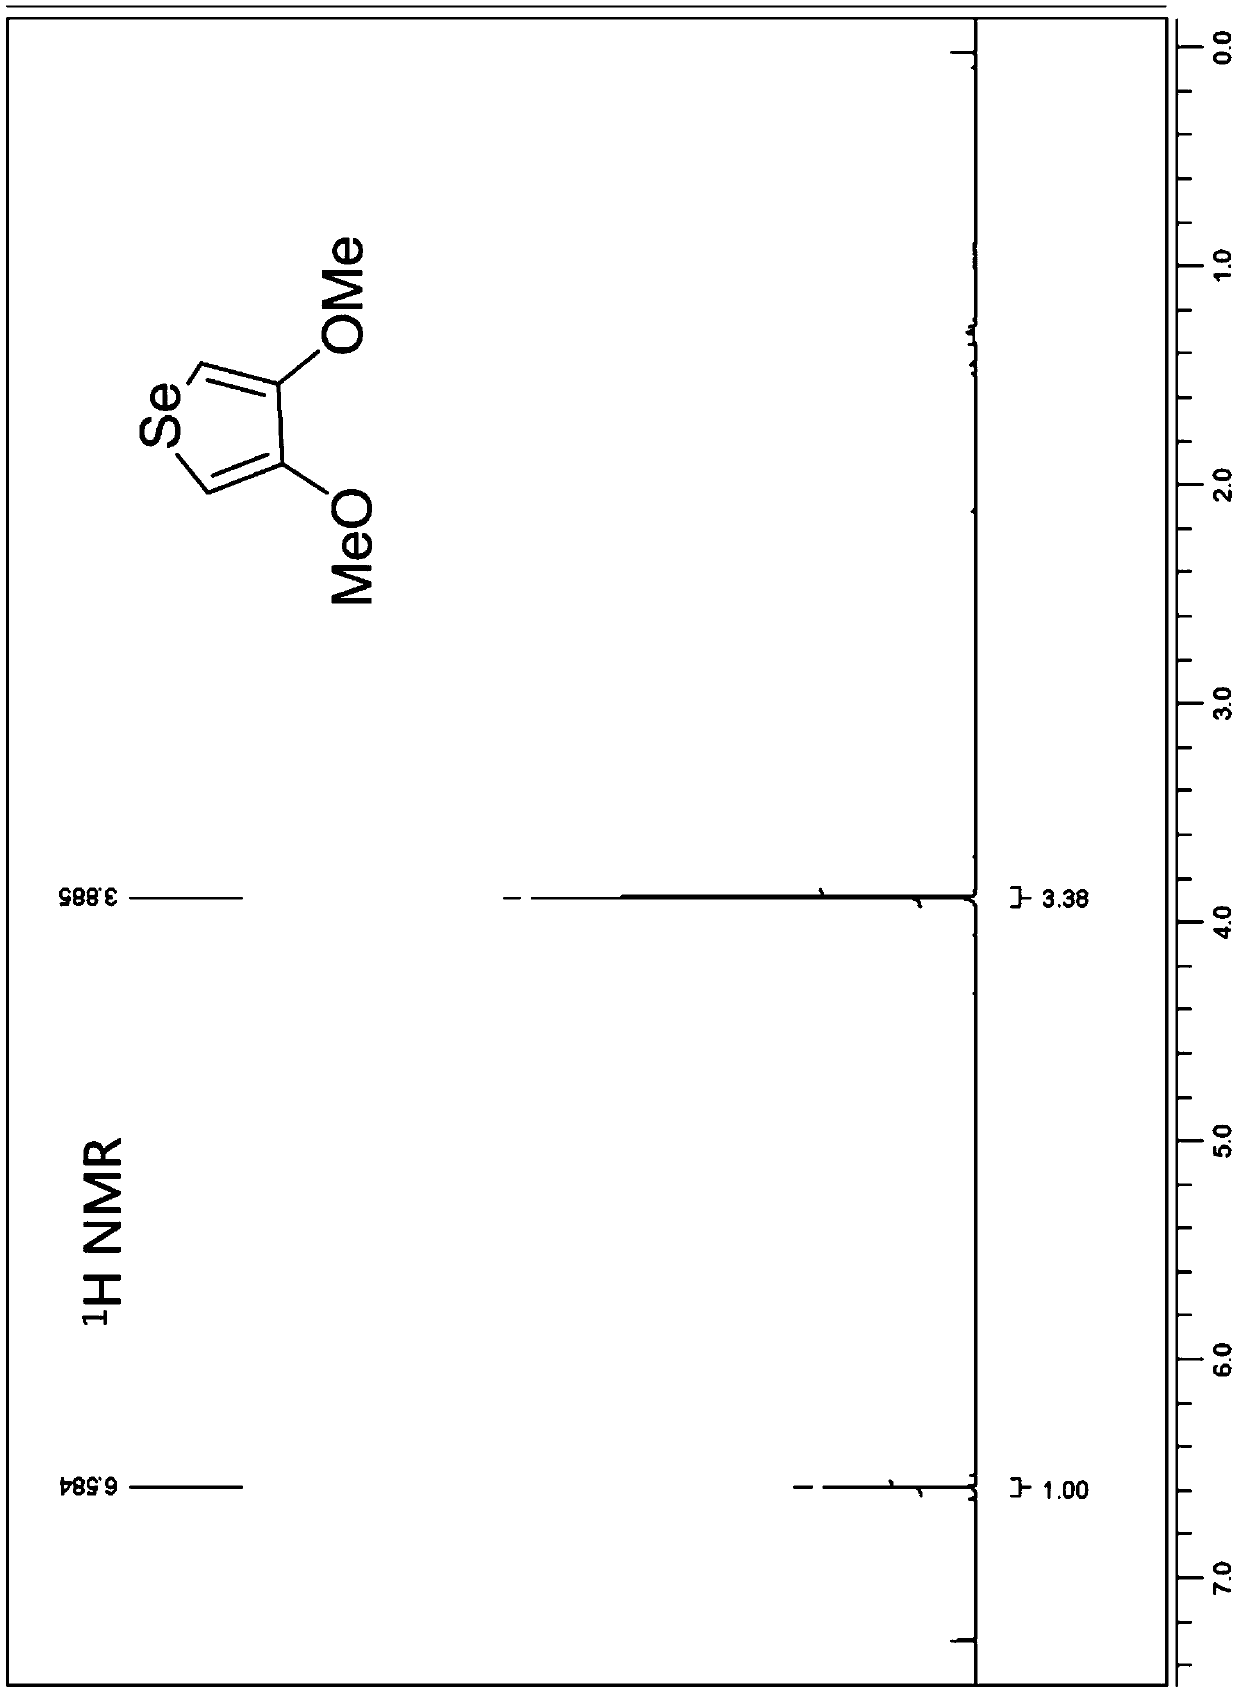 Organic n-type semiconductor polymer material based on naphthalimide-selenophen derivative as well as preparation method and application of organic n-type semiconductor polymer material